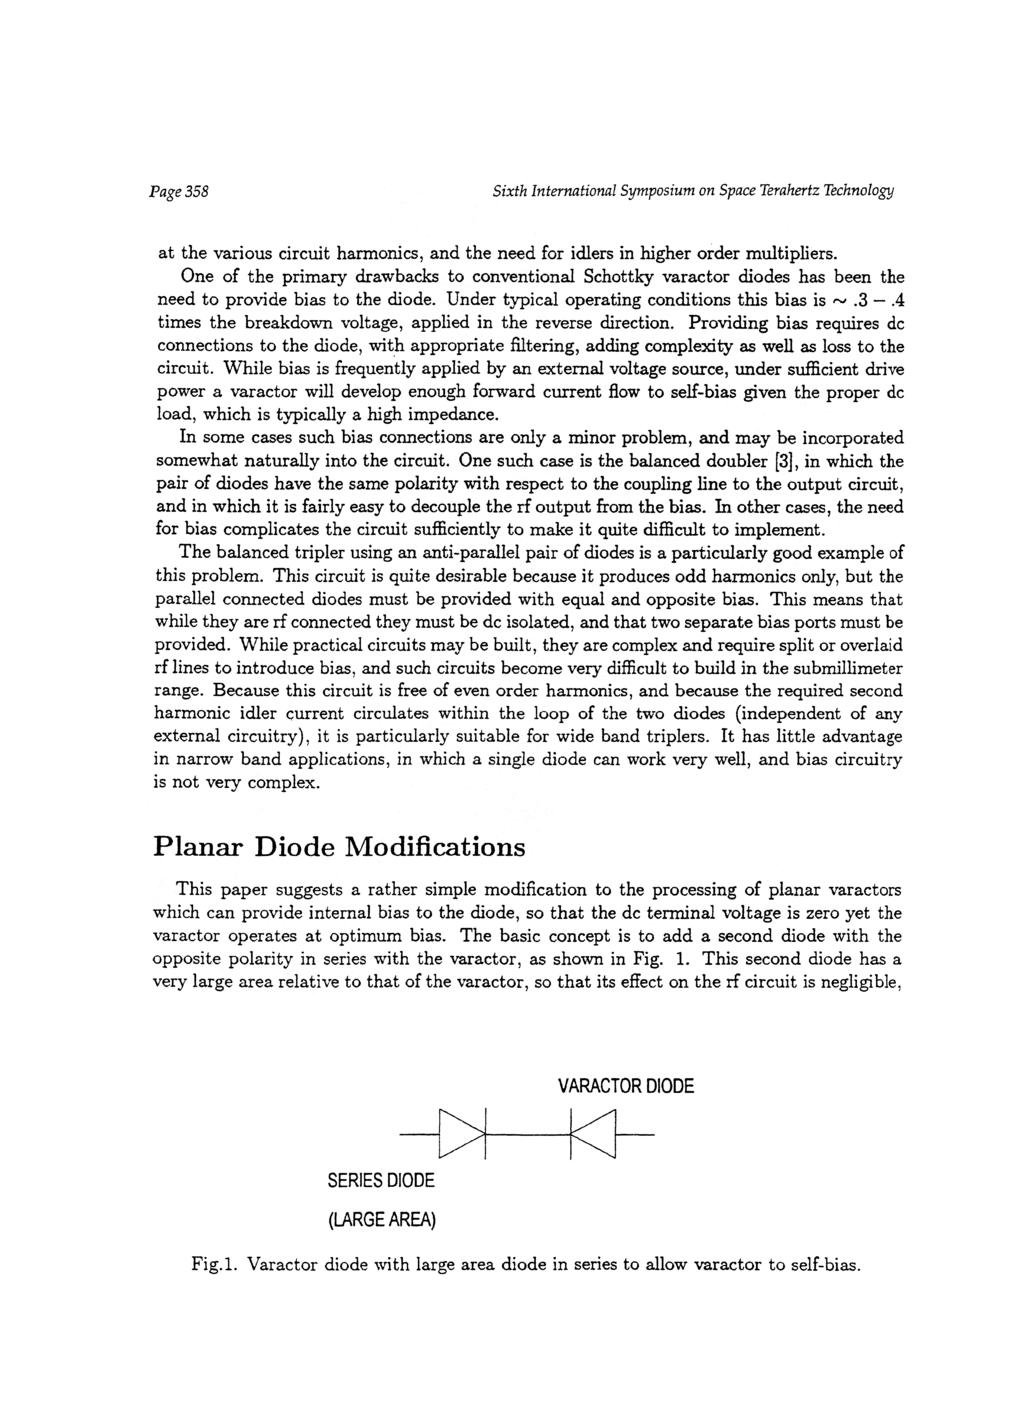 Page 358 at the various circuit harmonics, and the need for idlers in higher order multipliers.